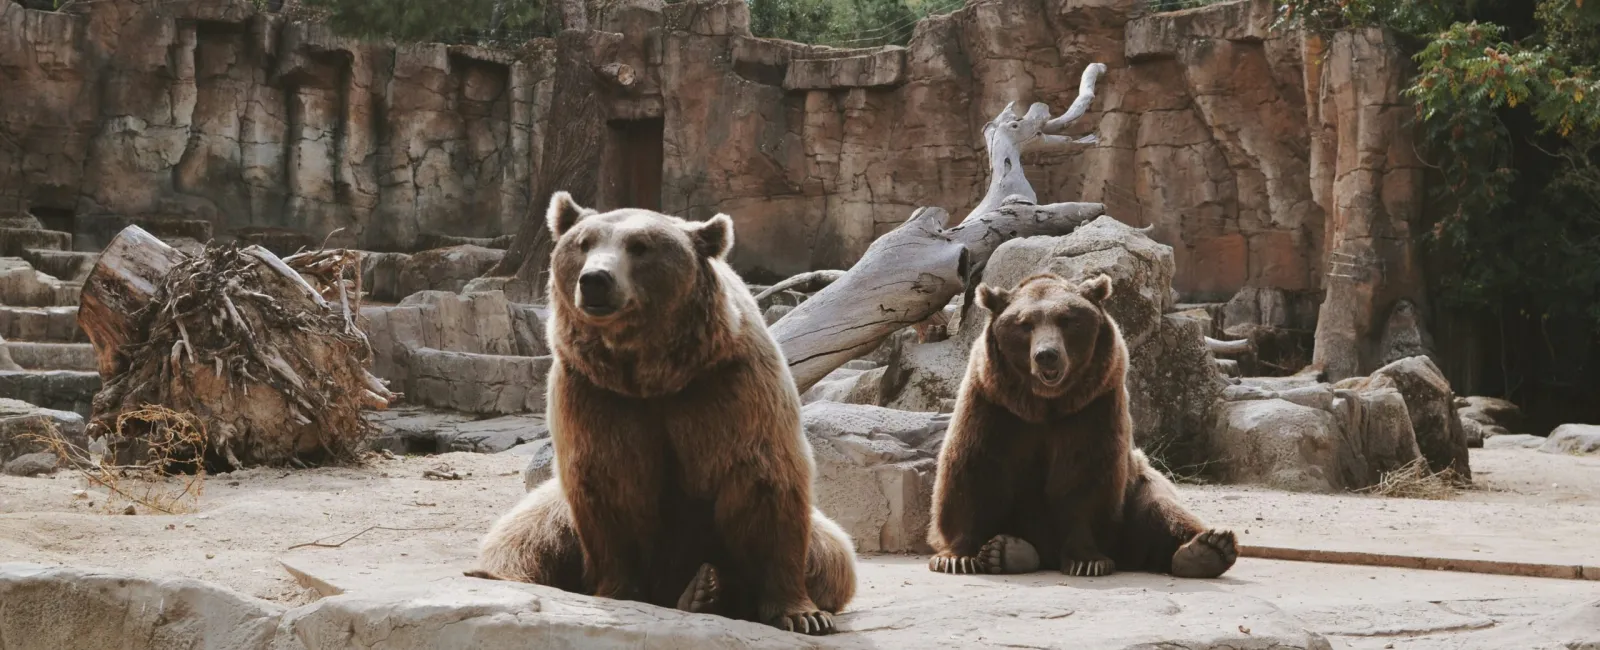 a couple of bears sit on a rock